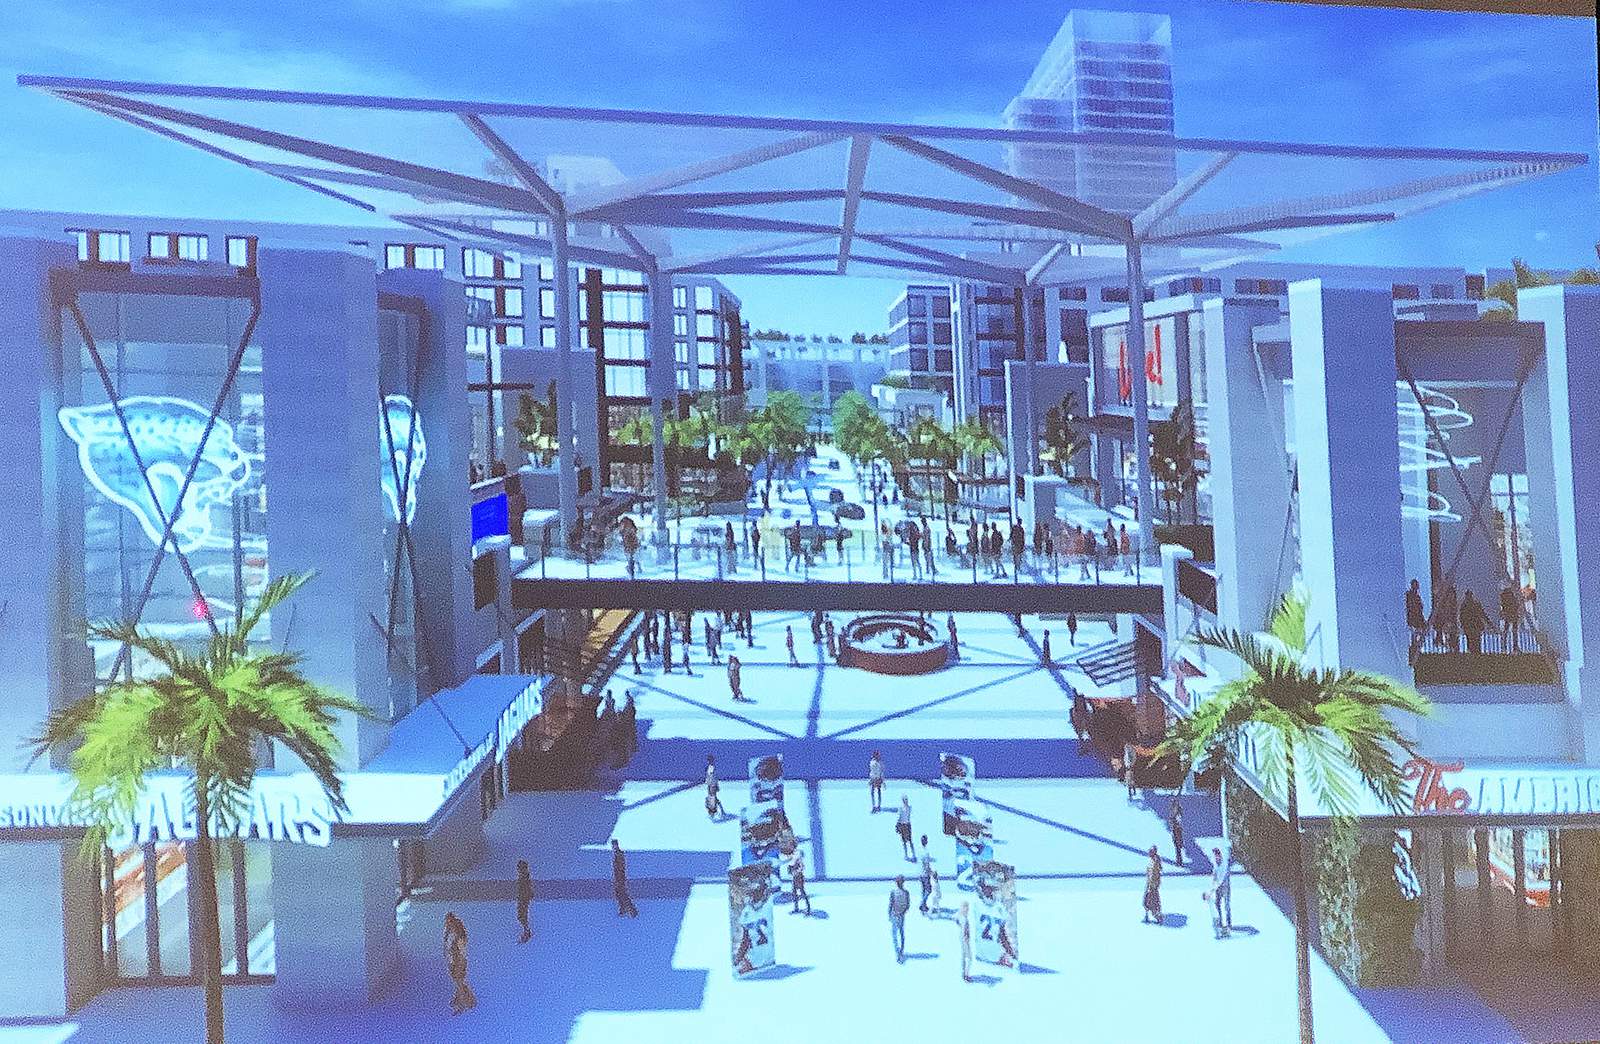 New renderings, details for Lot J and Shipyards development unveiled